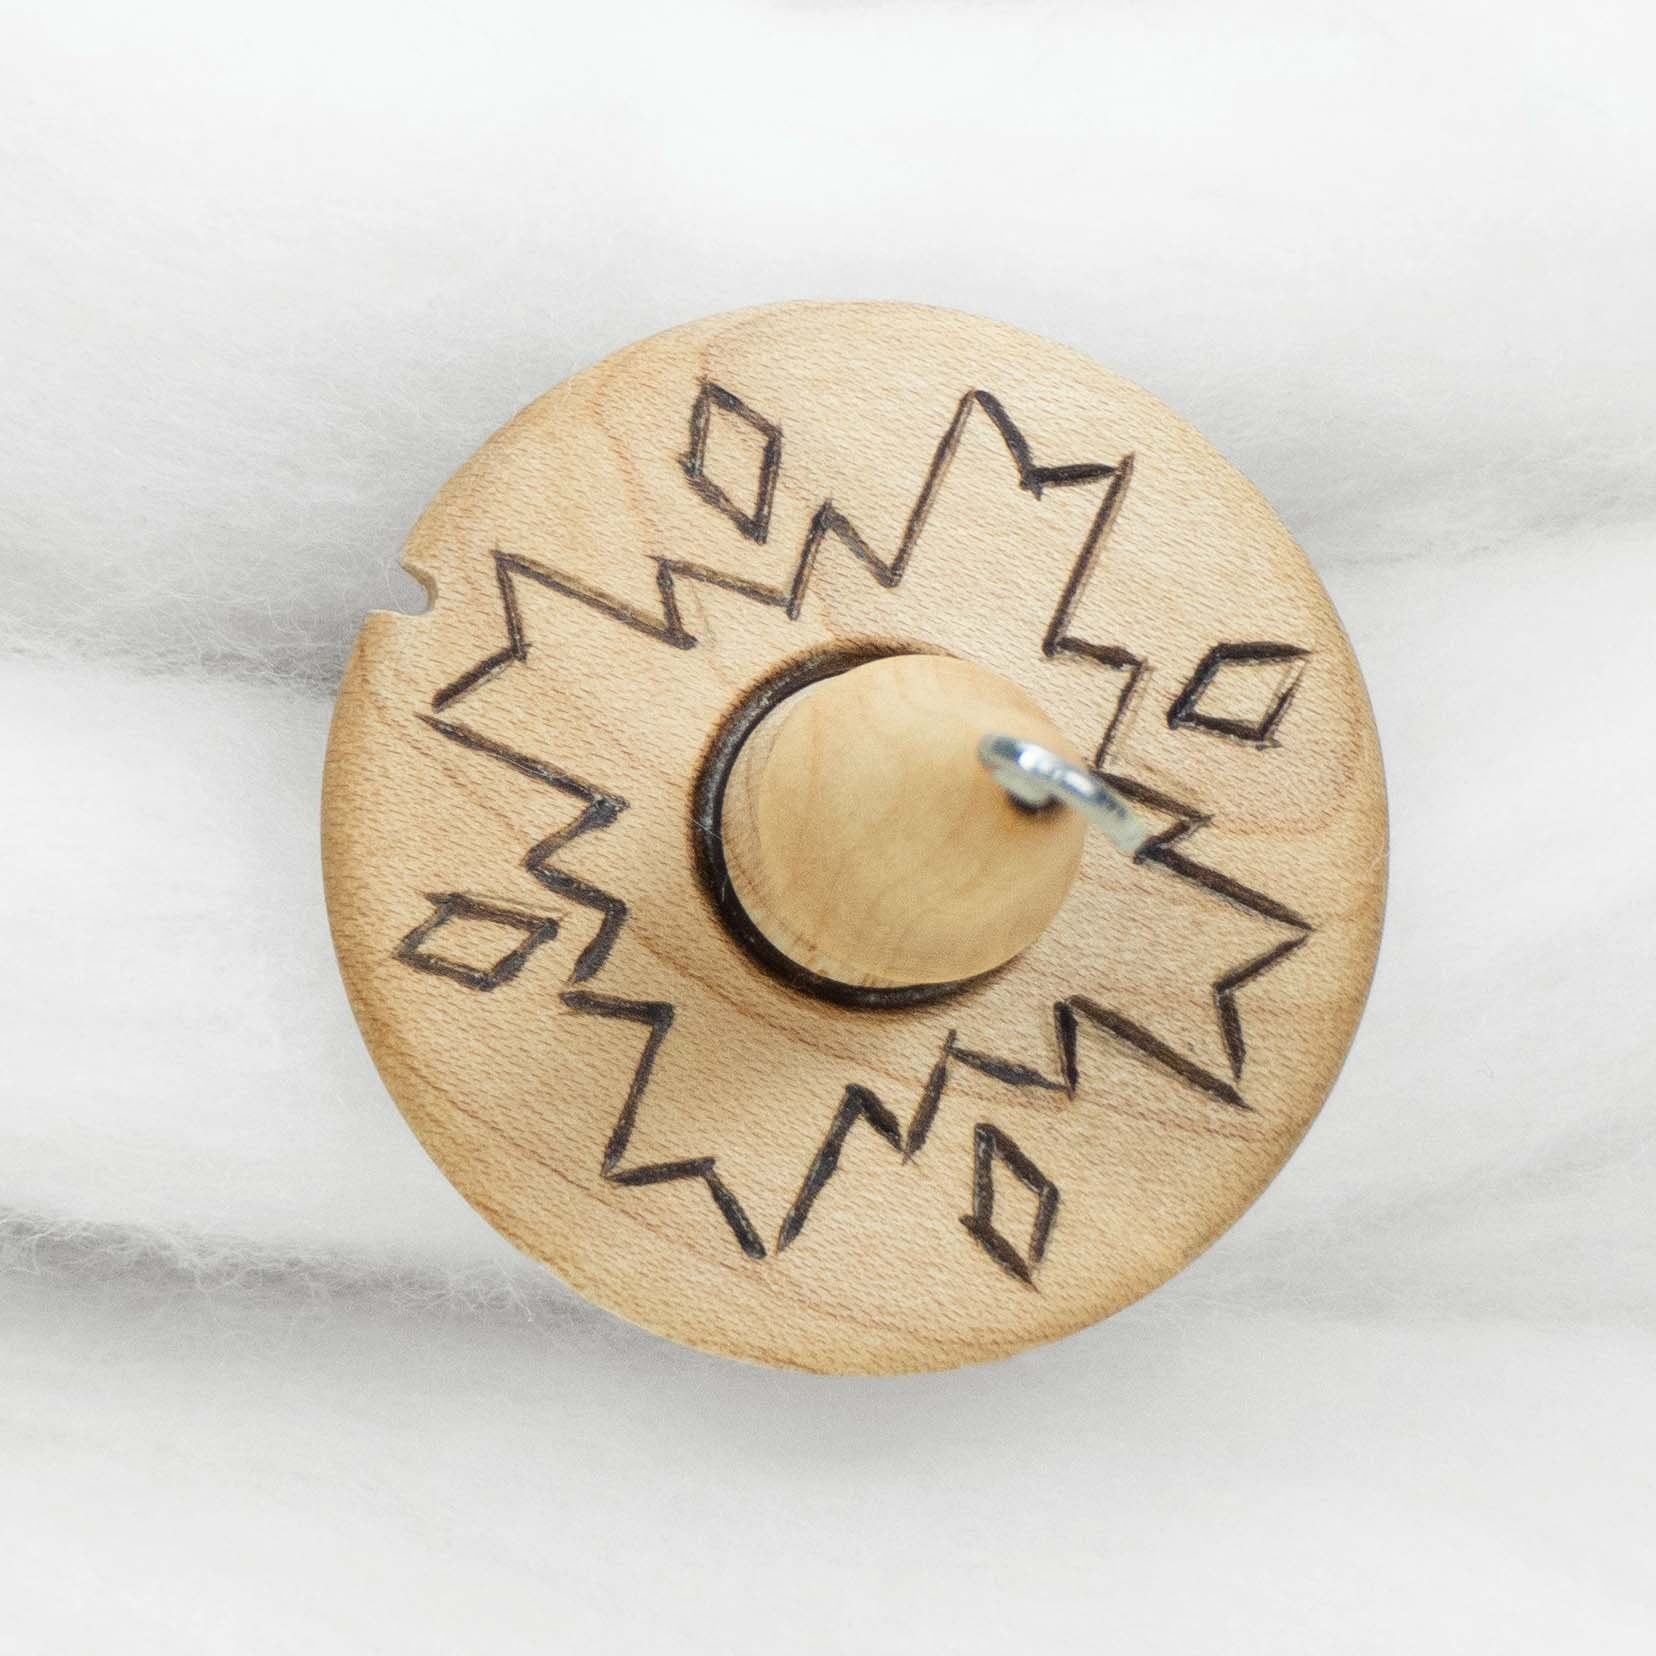 Llina Hand-Turned Maple Wood Pyrograph Drop Spindle Lightweight Top Whorl 15 Grams